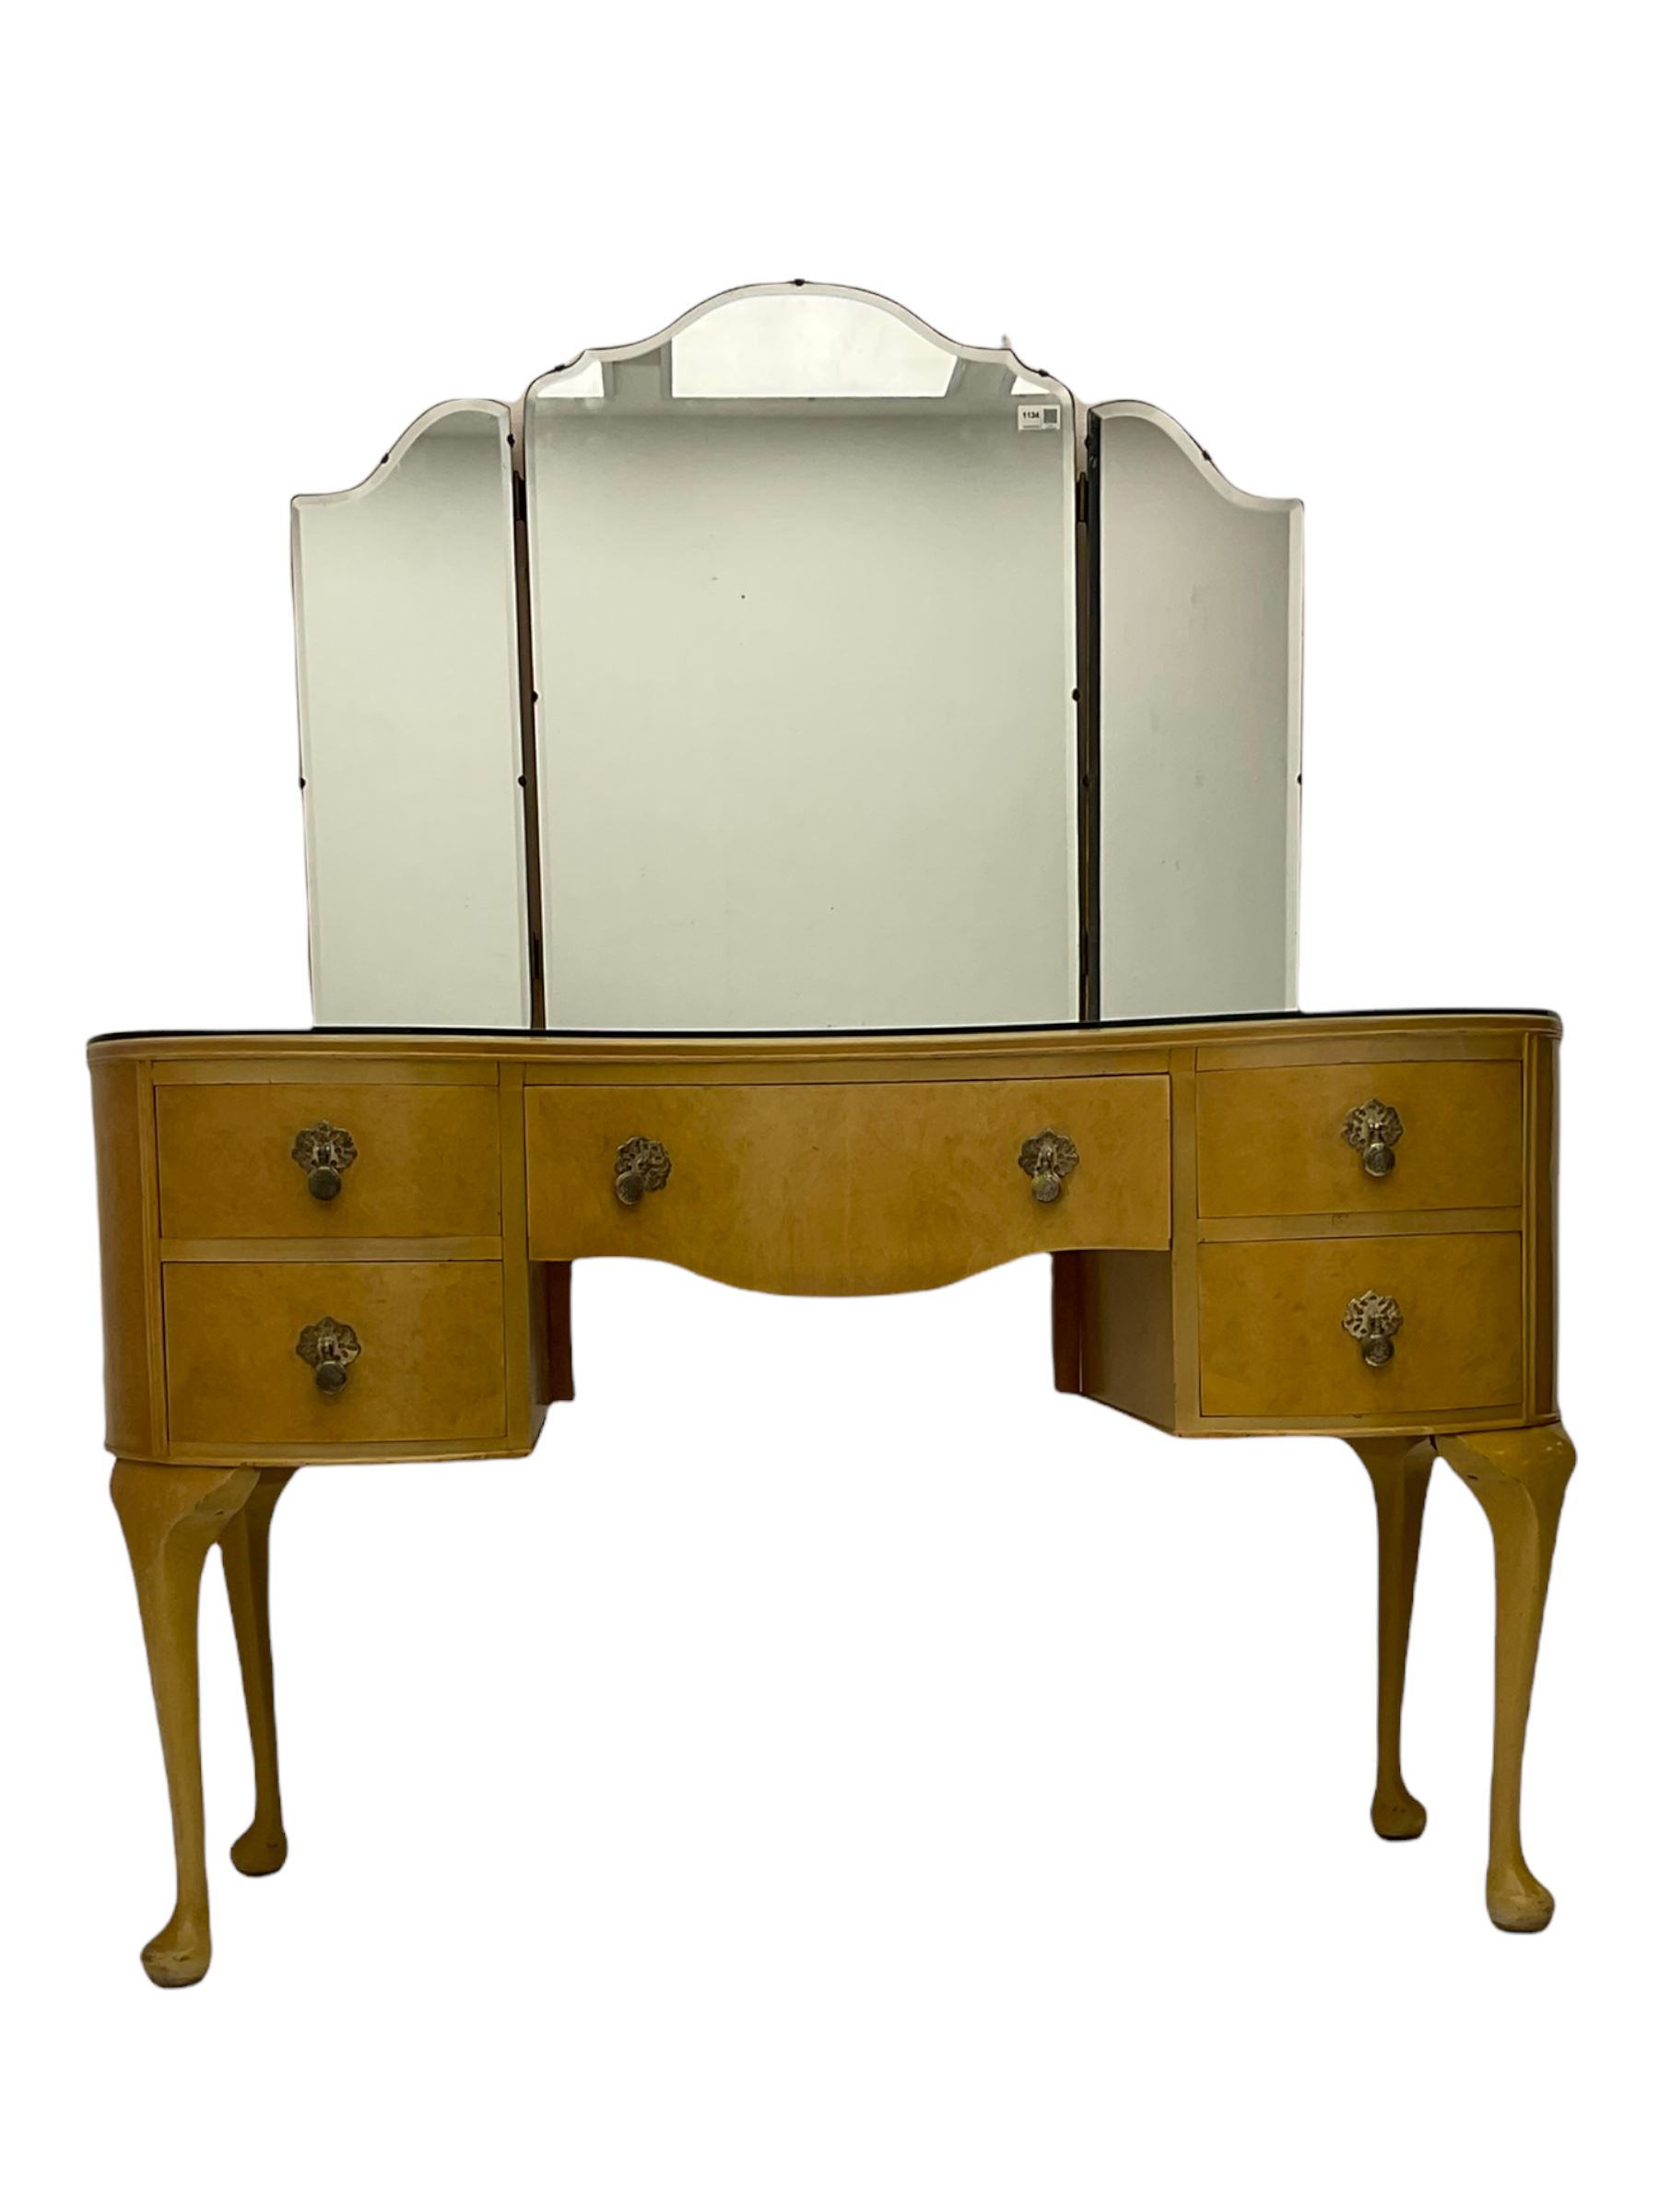 Early 20th century bleached walnut kidney shaped dressing table - Image 4 of 7